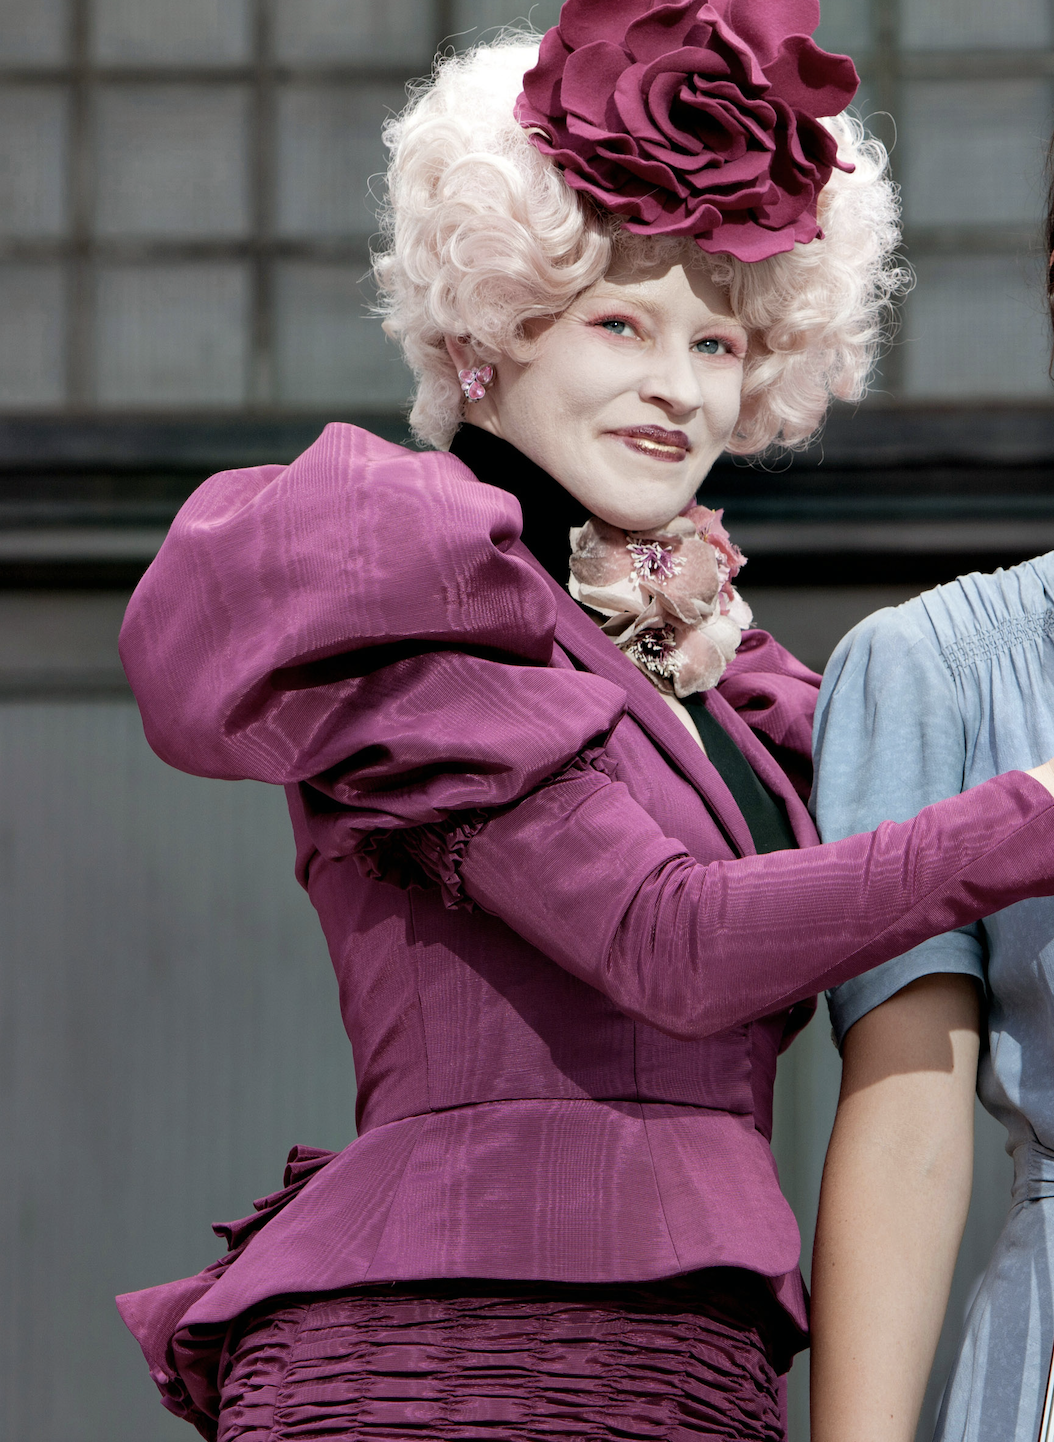 Effie Trinket from The Hunger Games, wearing a ruffled dress with matching hat